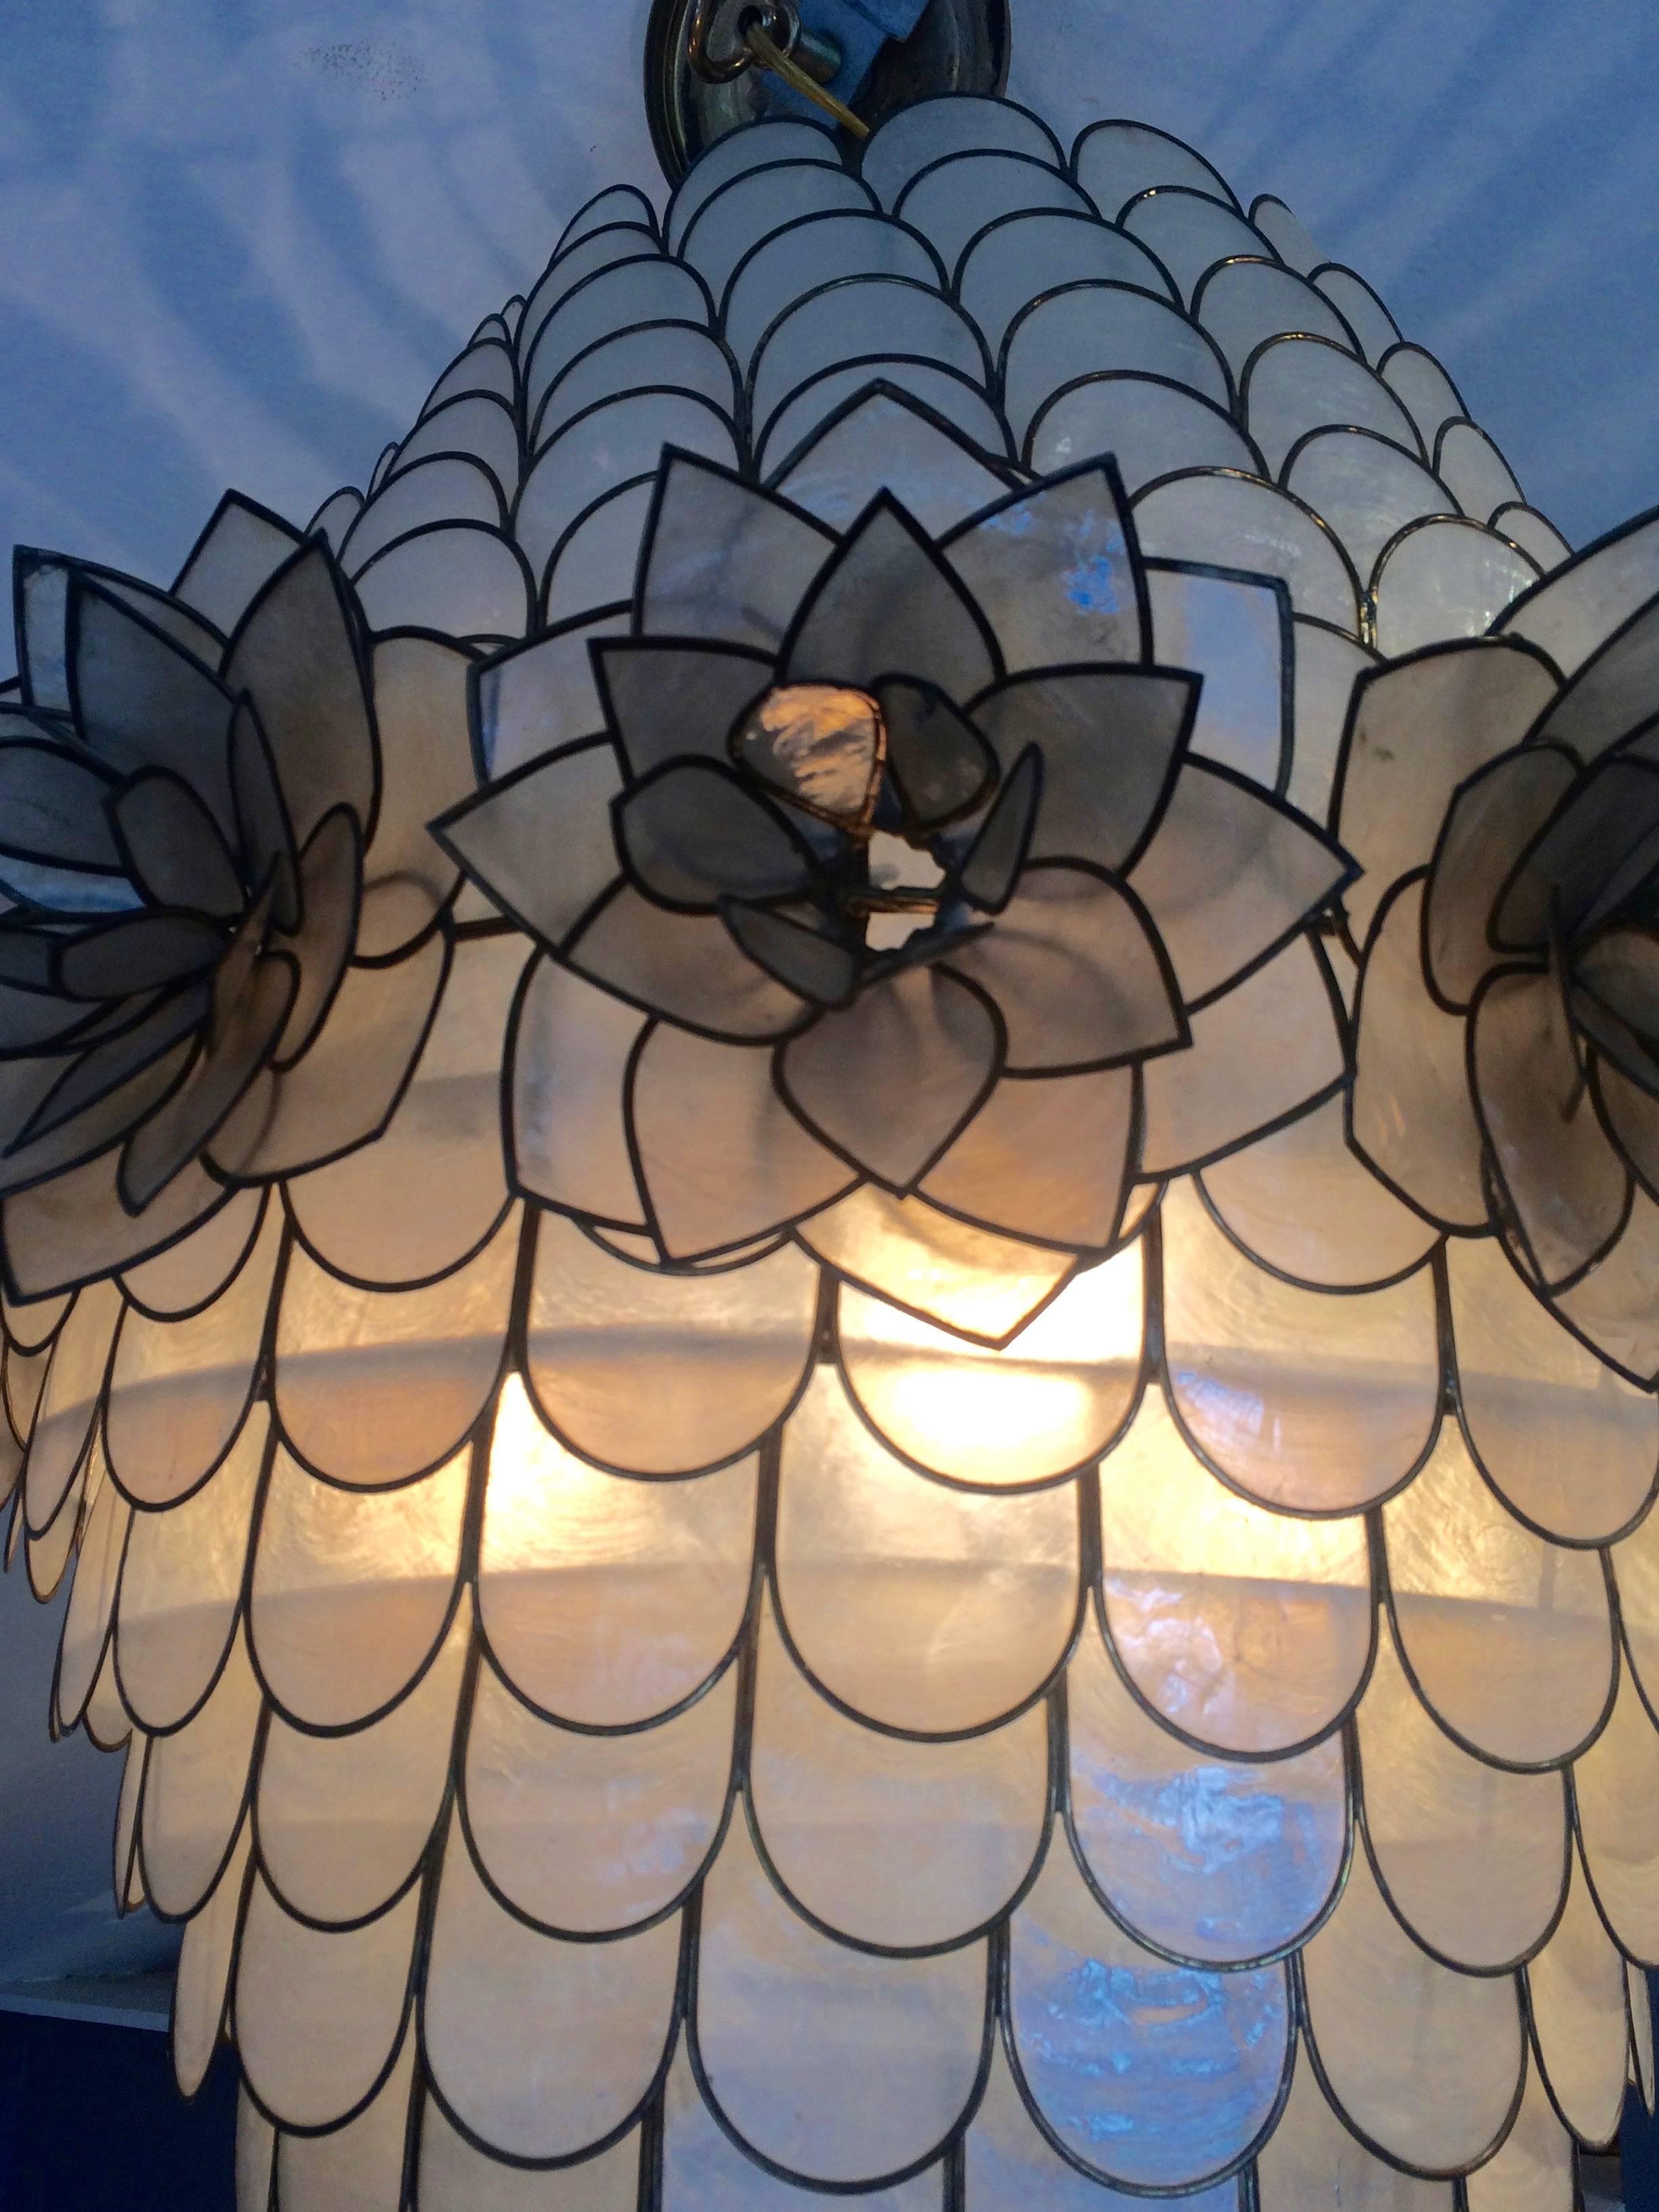 Impressive in scale and very stylish abalone shell capiz style chandelier adorned with a row of shell flowers around the periphery of the widest section.
Takes three 60 watt bulbs.

OGT